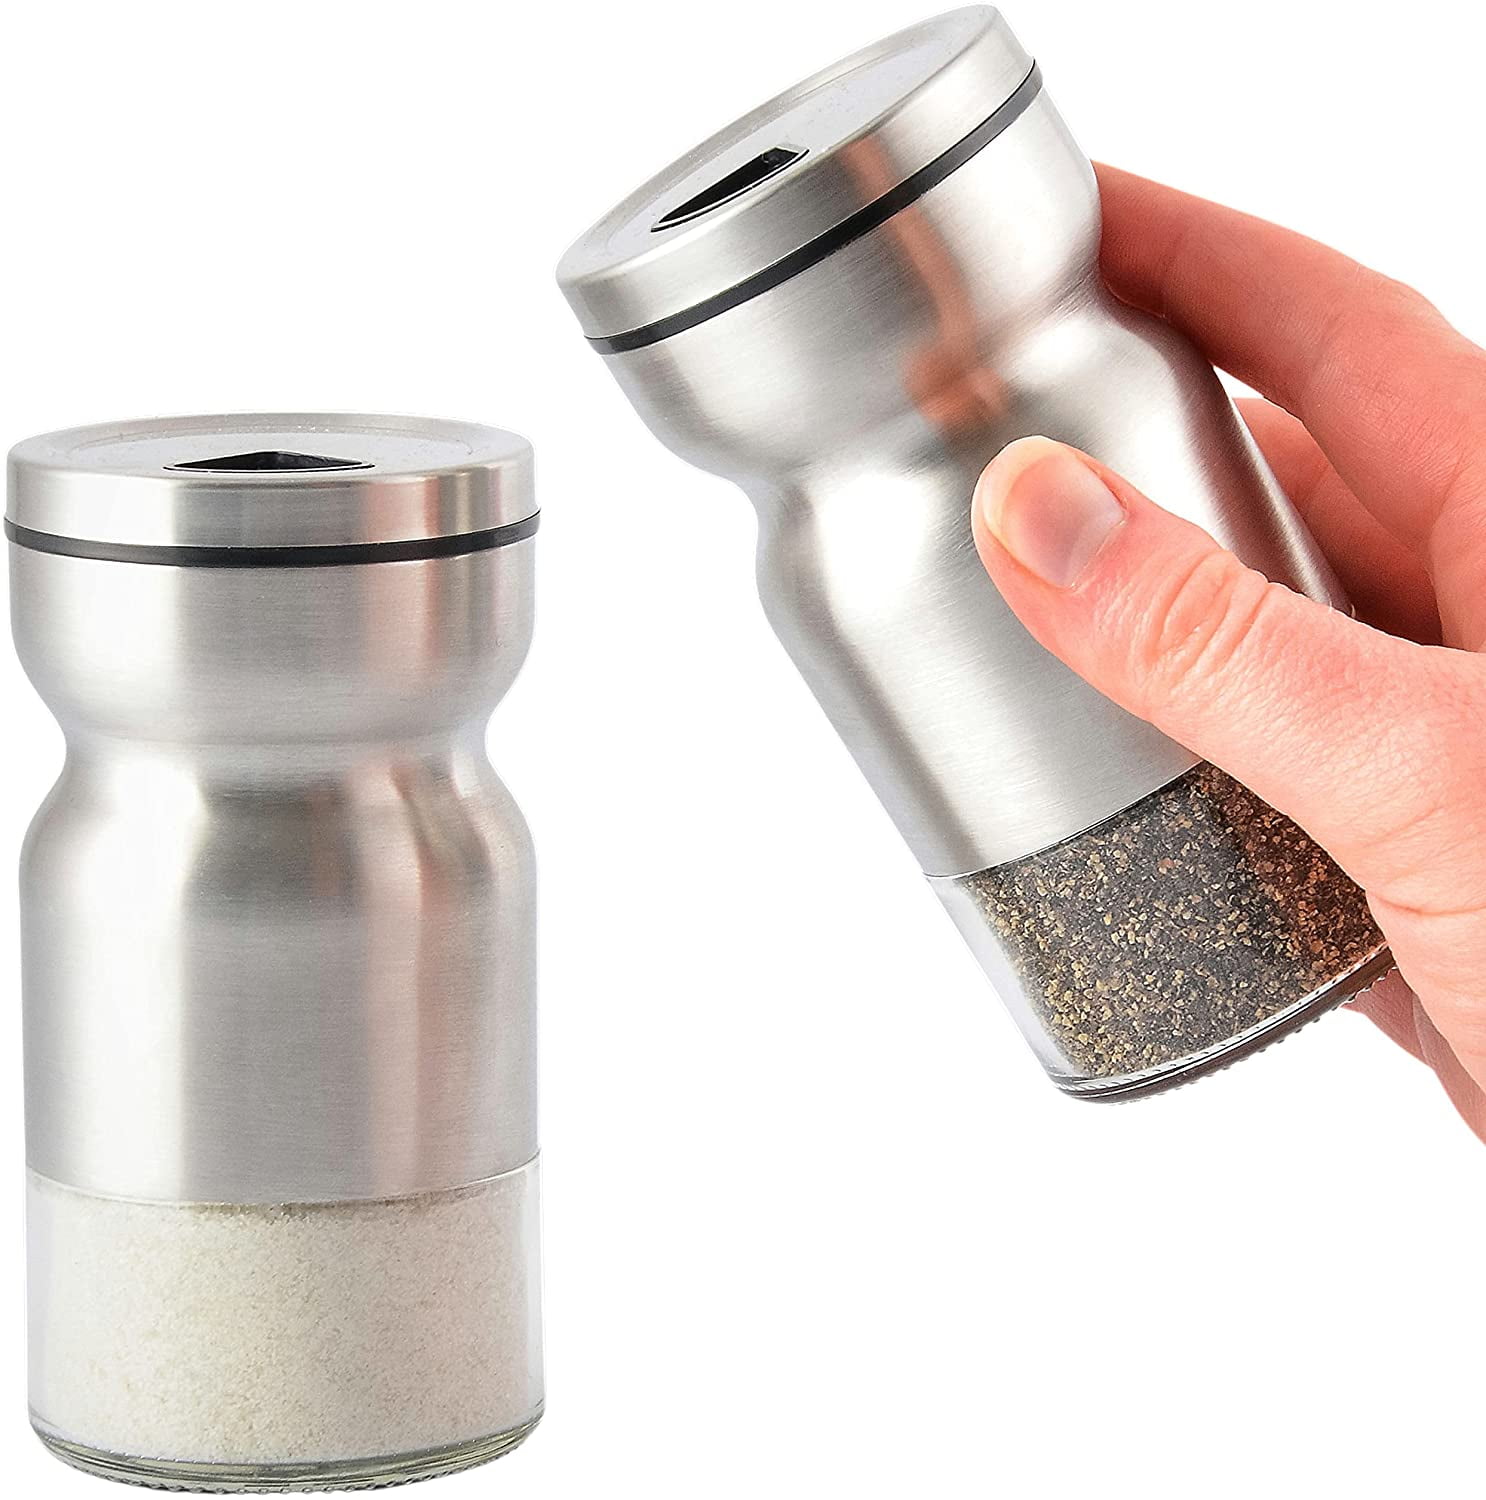 Bubble bottom salt and pepper shakers